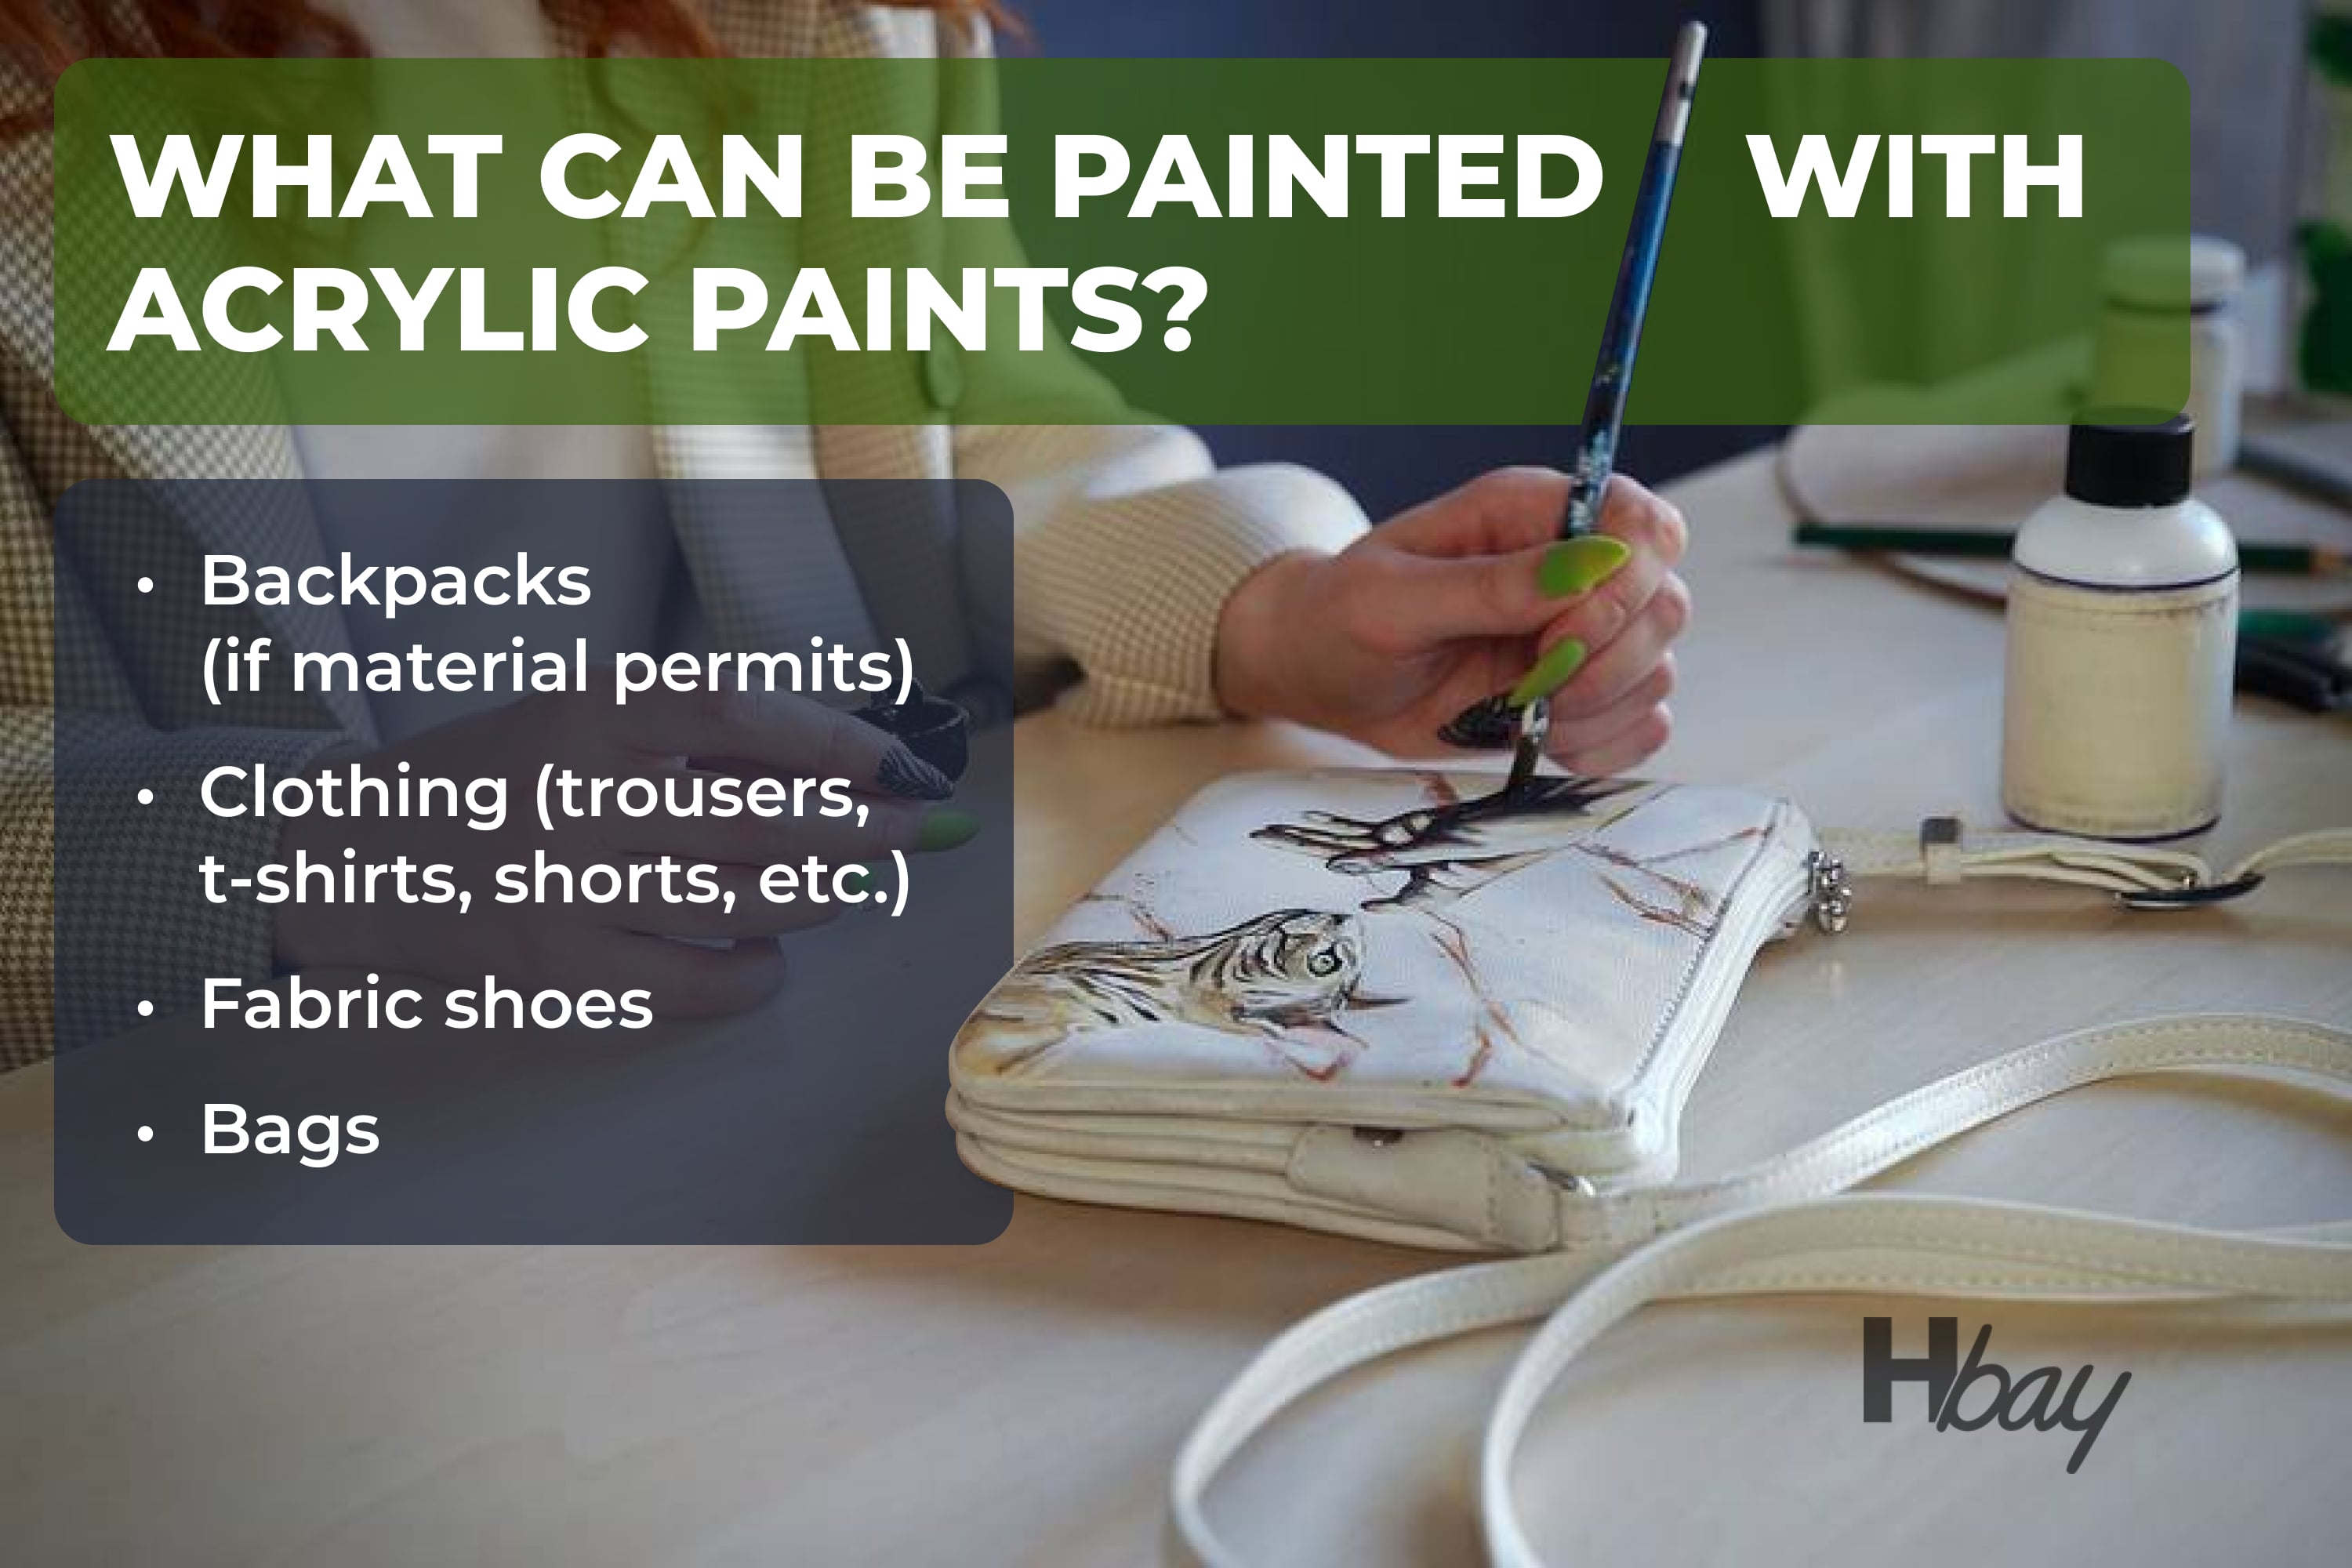 What can be painted with acrylic paints